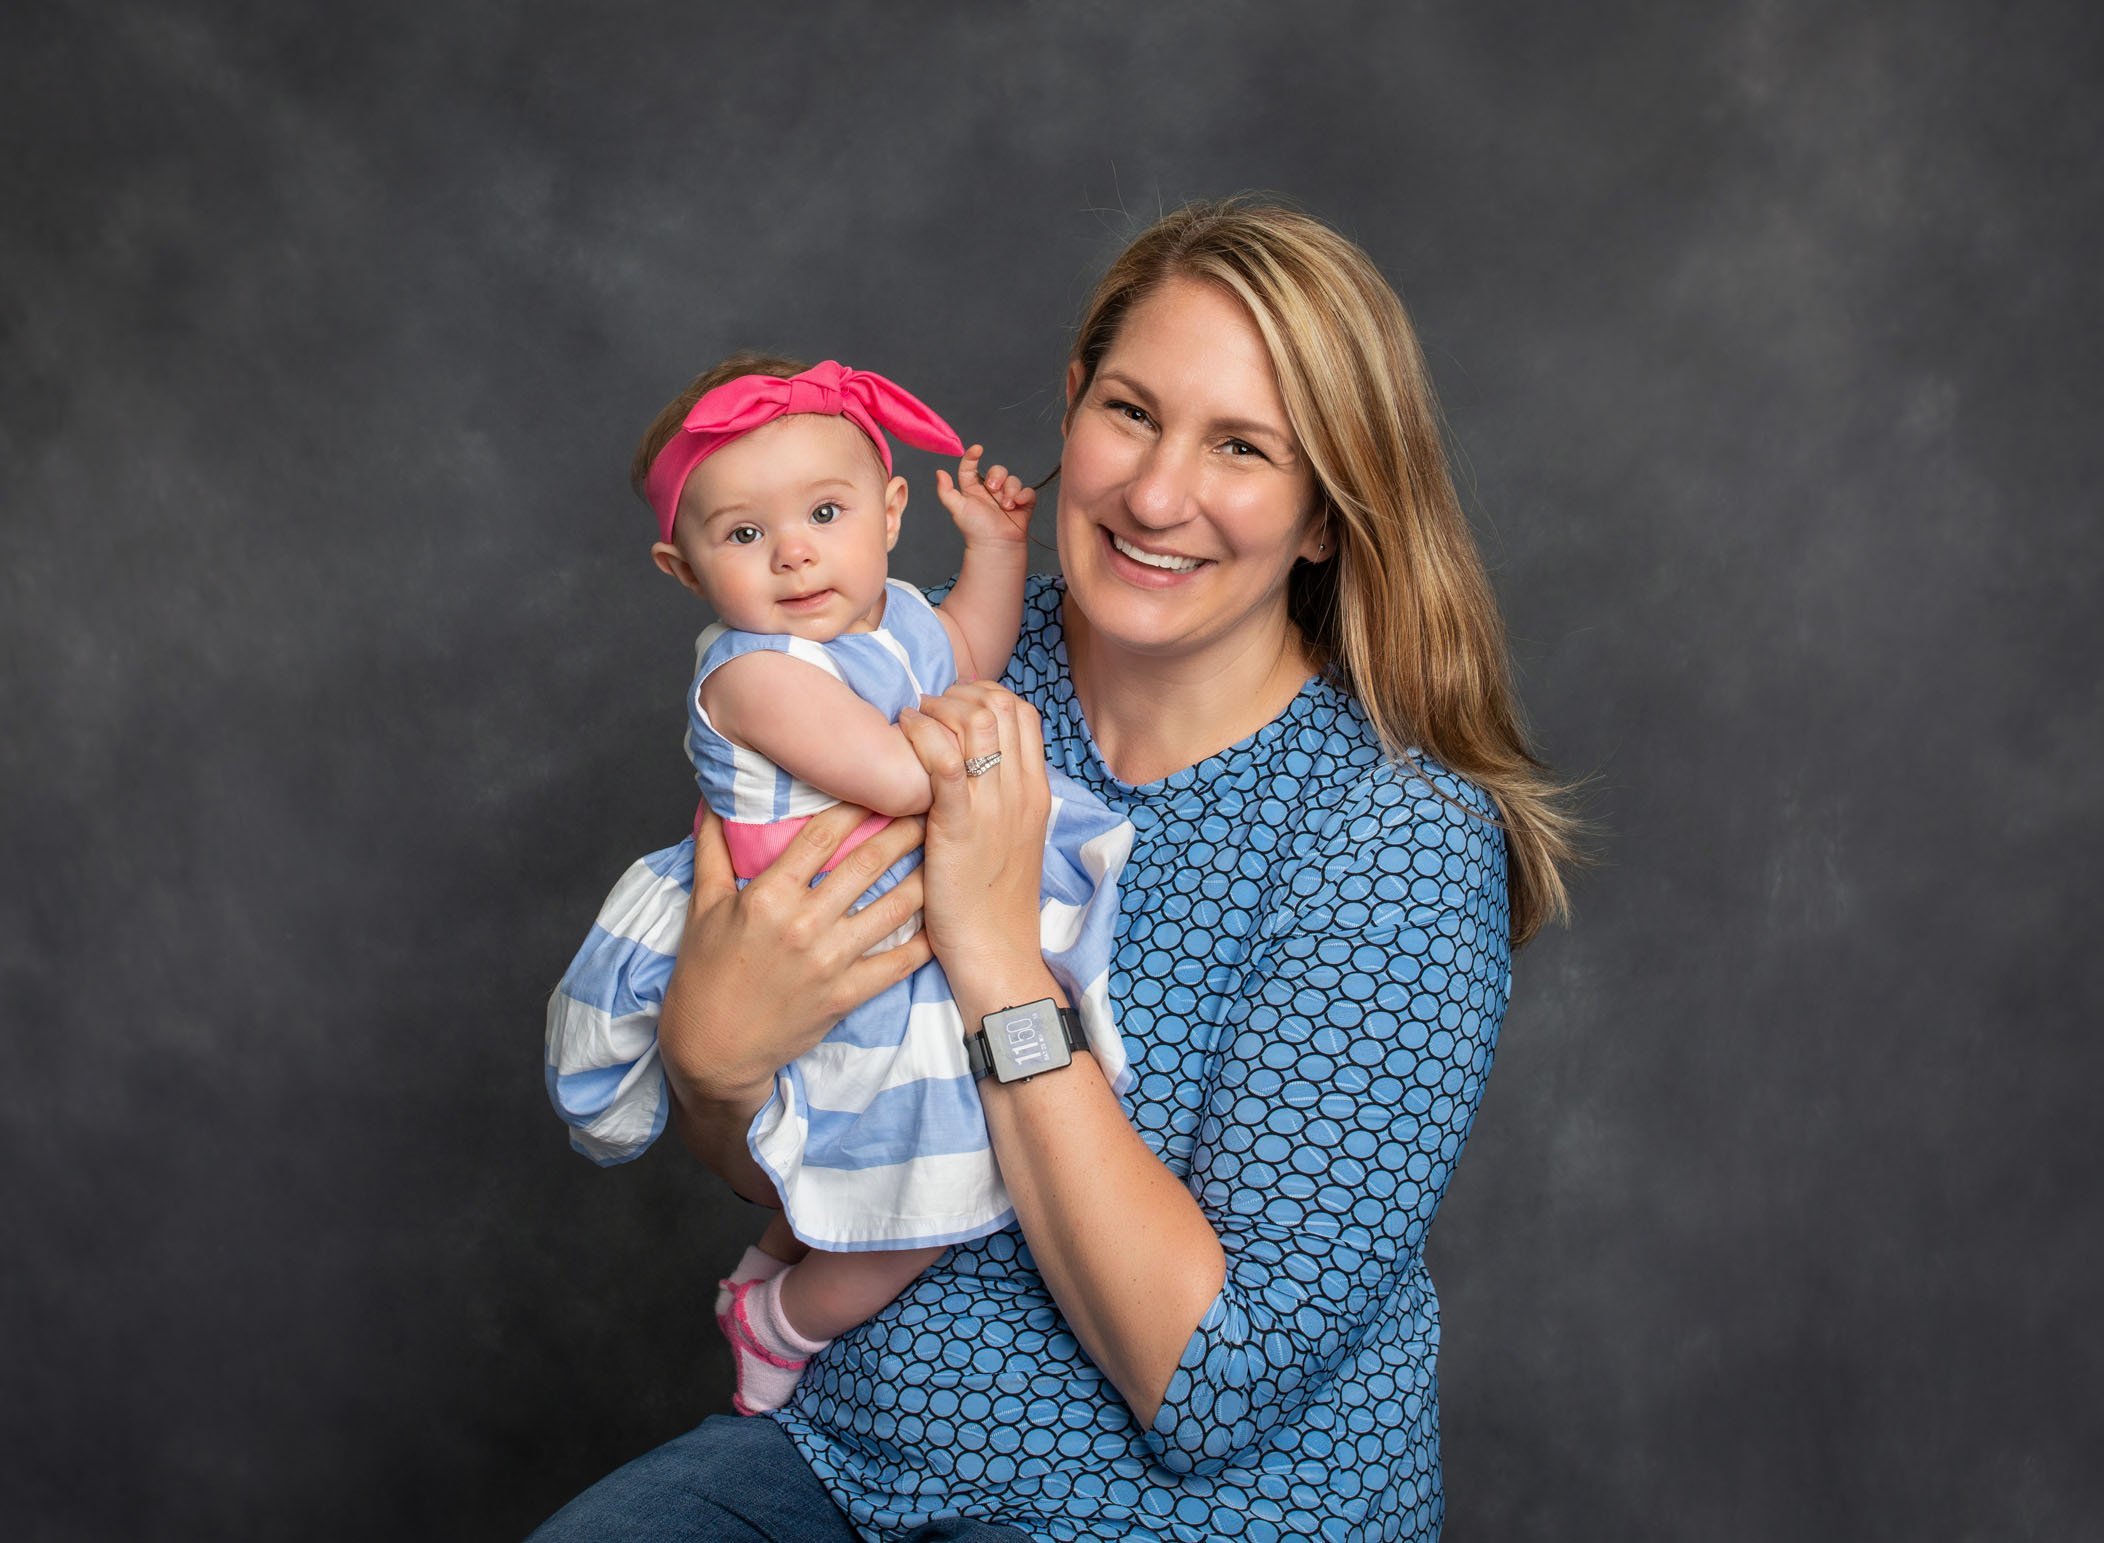 Mom holding her 6 month old baby girl smiling for studio portrait